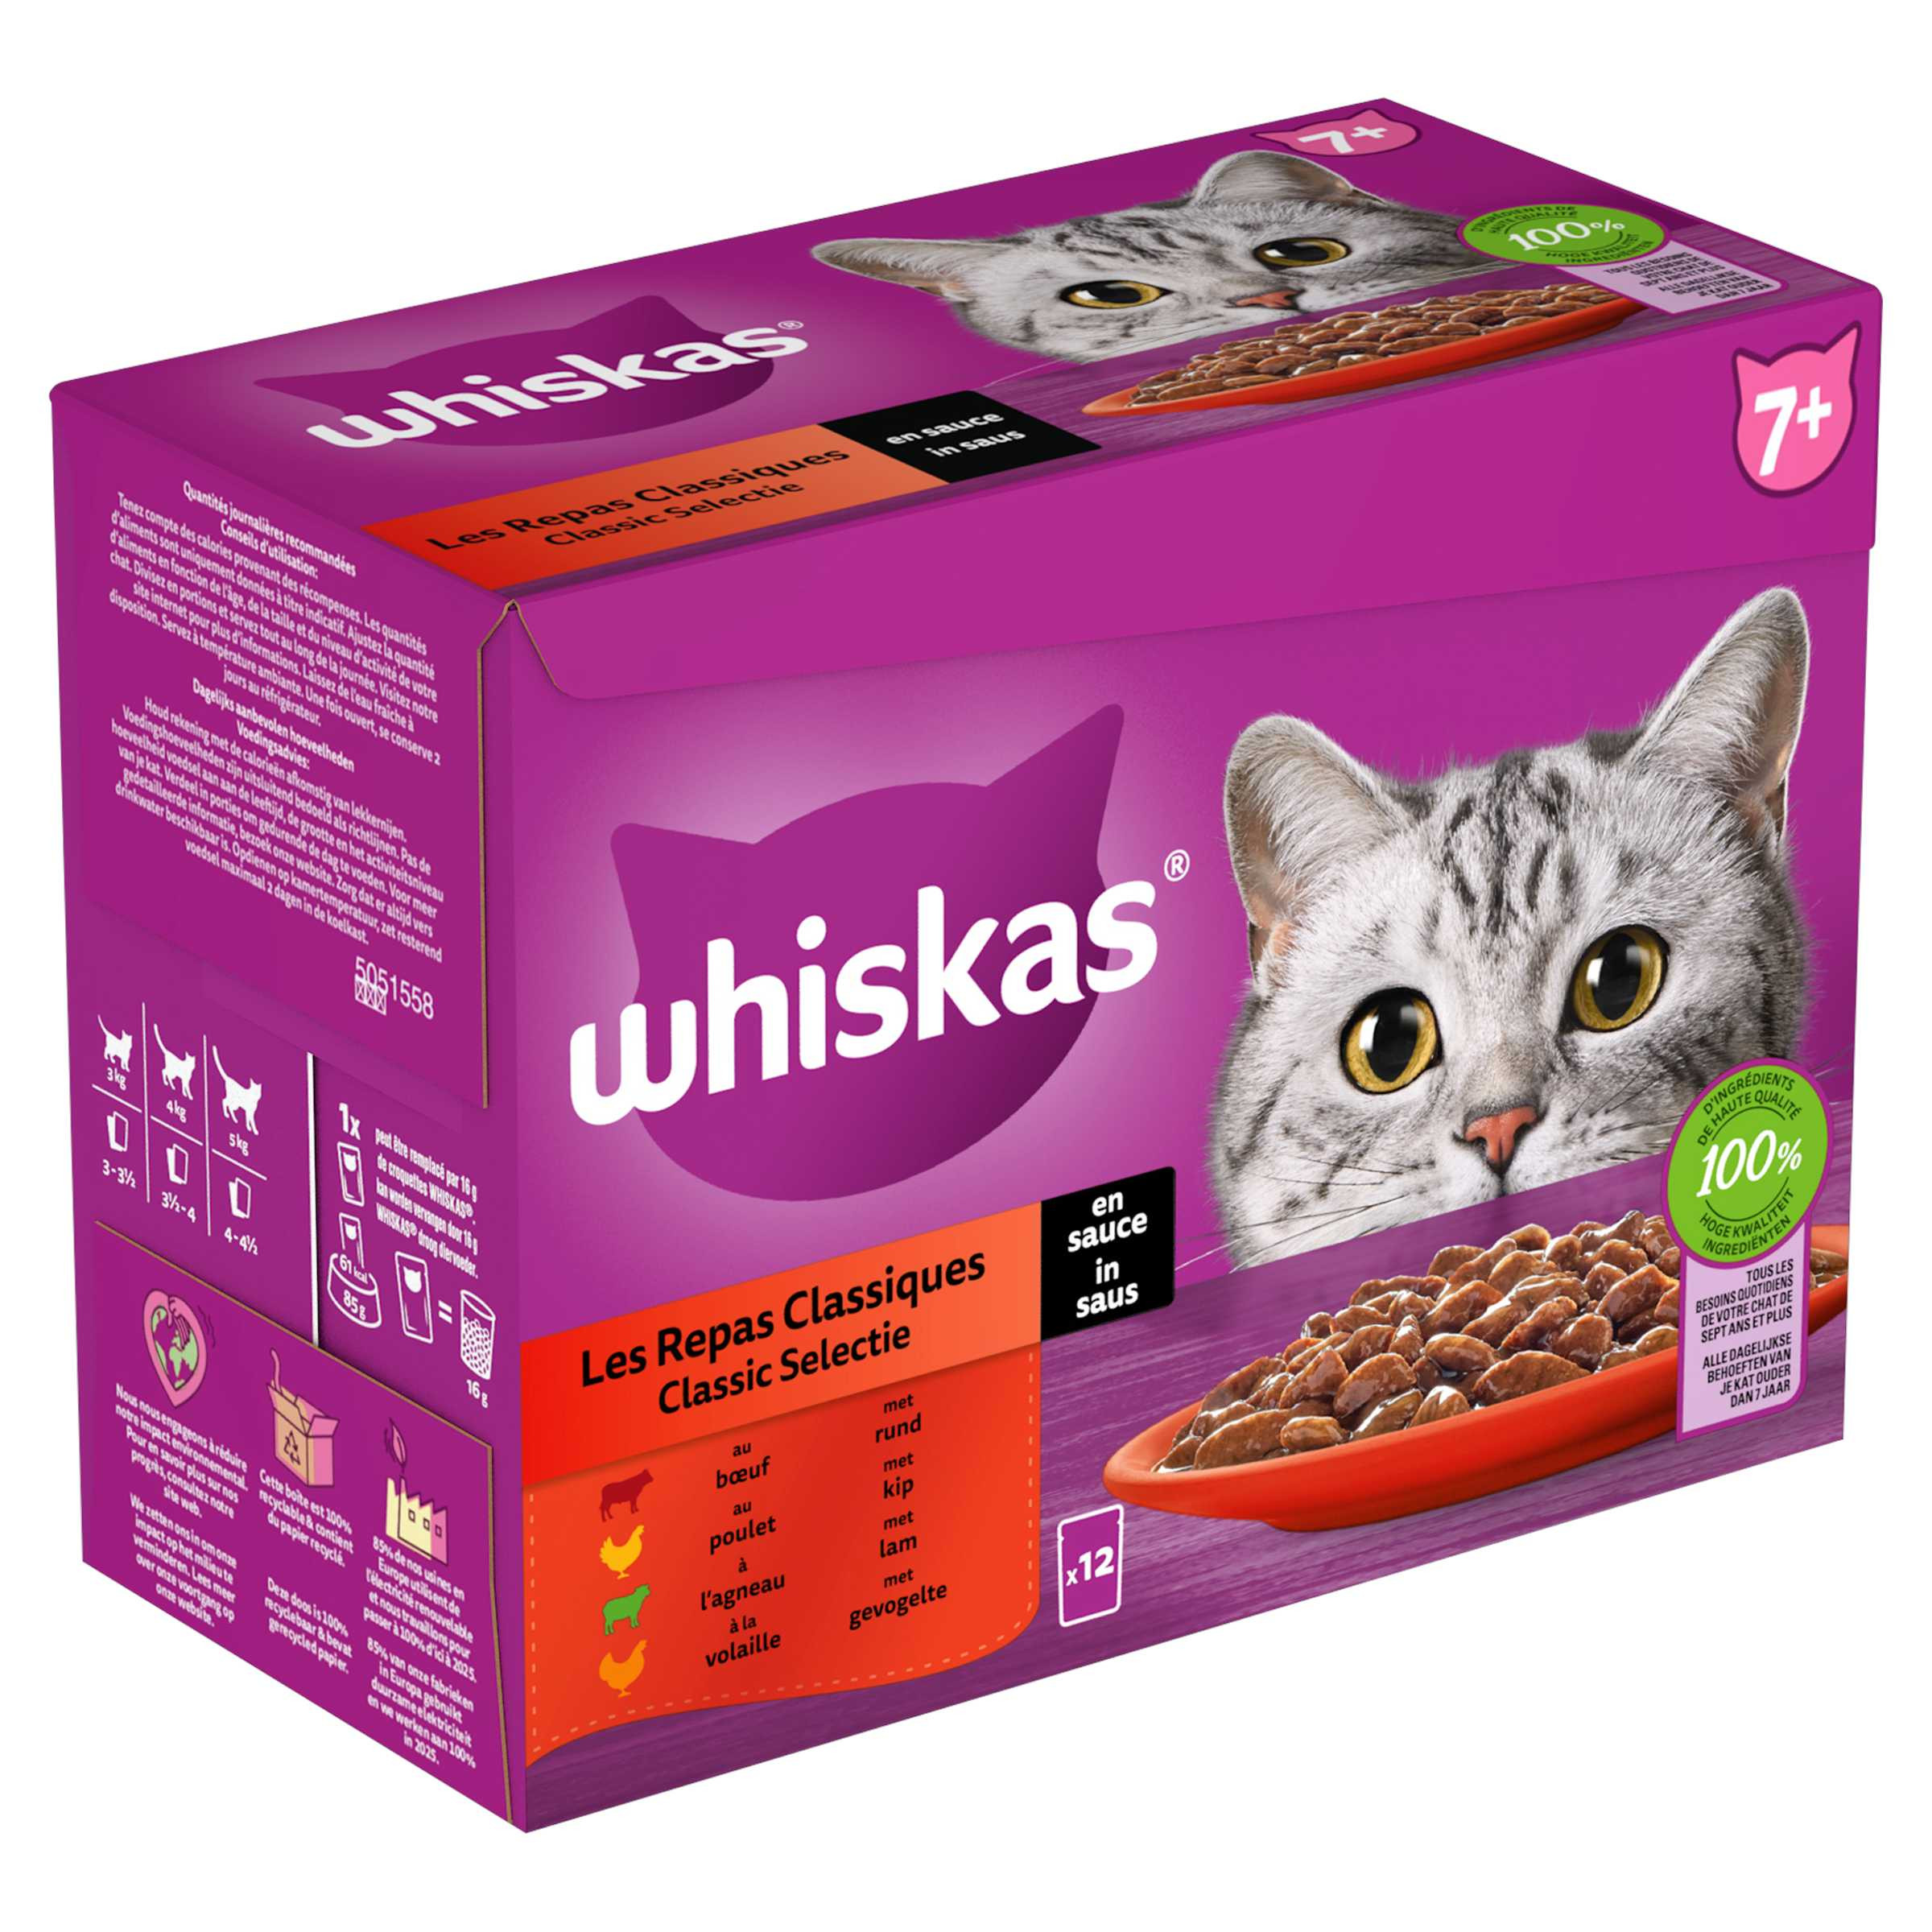 Whiskas 7+ Classic Selectie in Saus pouches multipack 12 x 85g